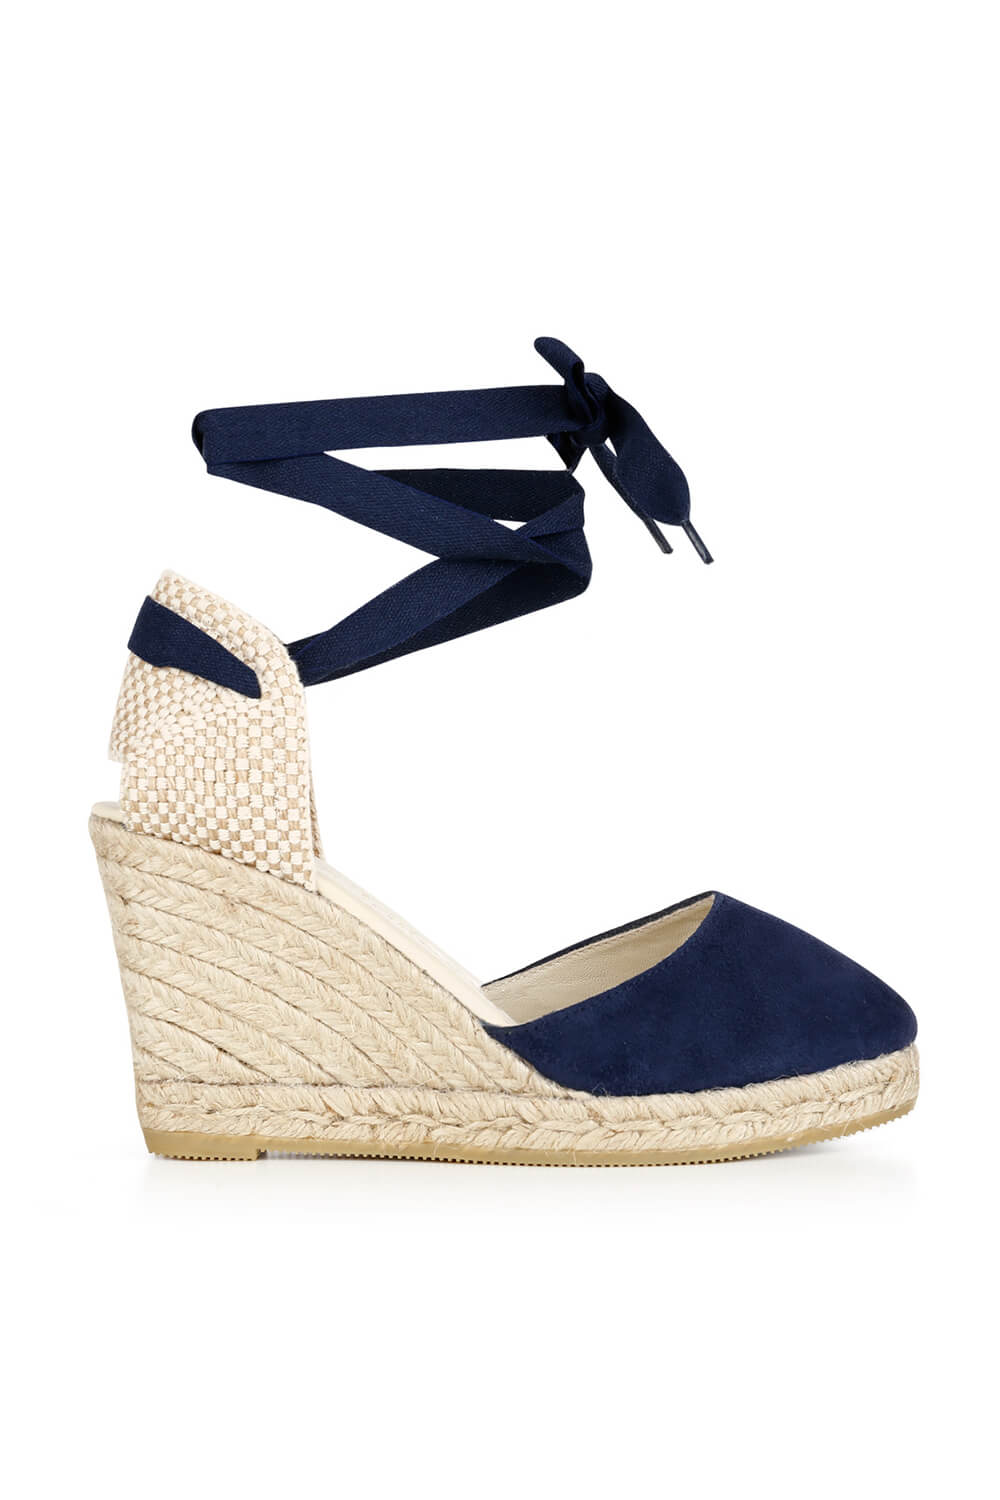 blue espadrilles with linen ankle straps and wedge heels COLIN ULTRAMARINO | ASITA SAHABI